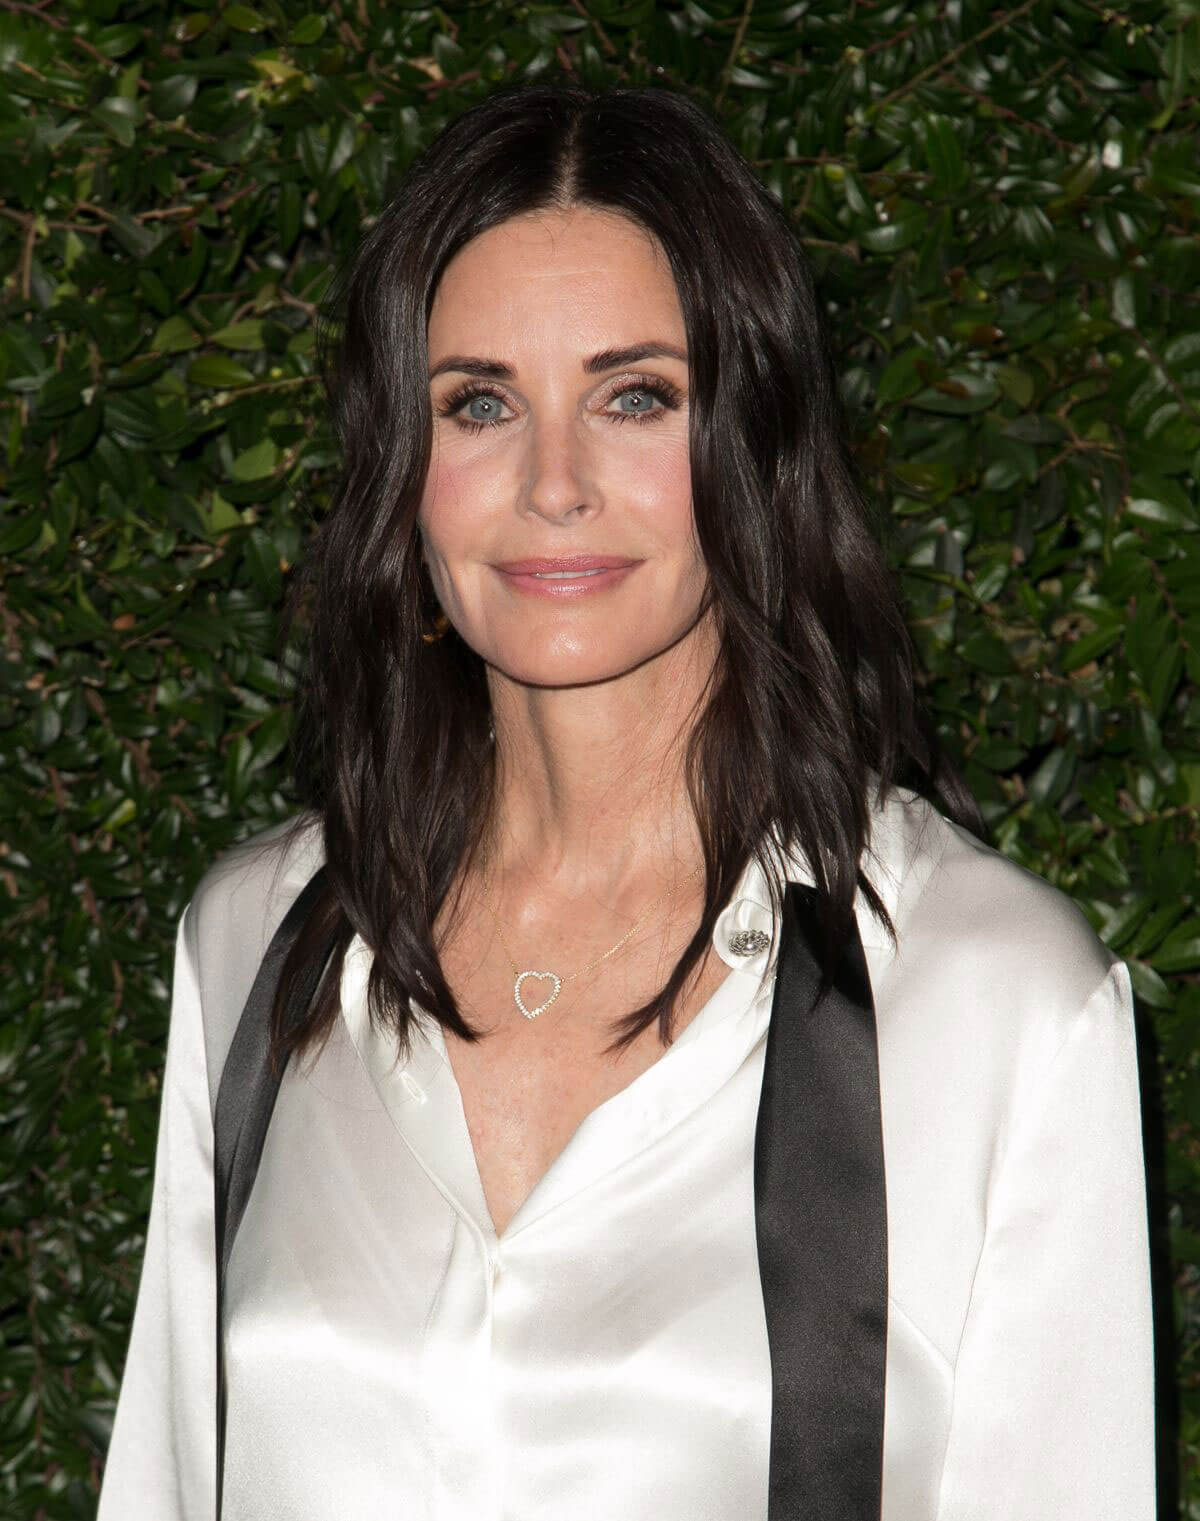 Courteney Cox at Chanel Dinner Celebrating Our Majestic Oceans in Malibu 2018/06/02